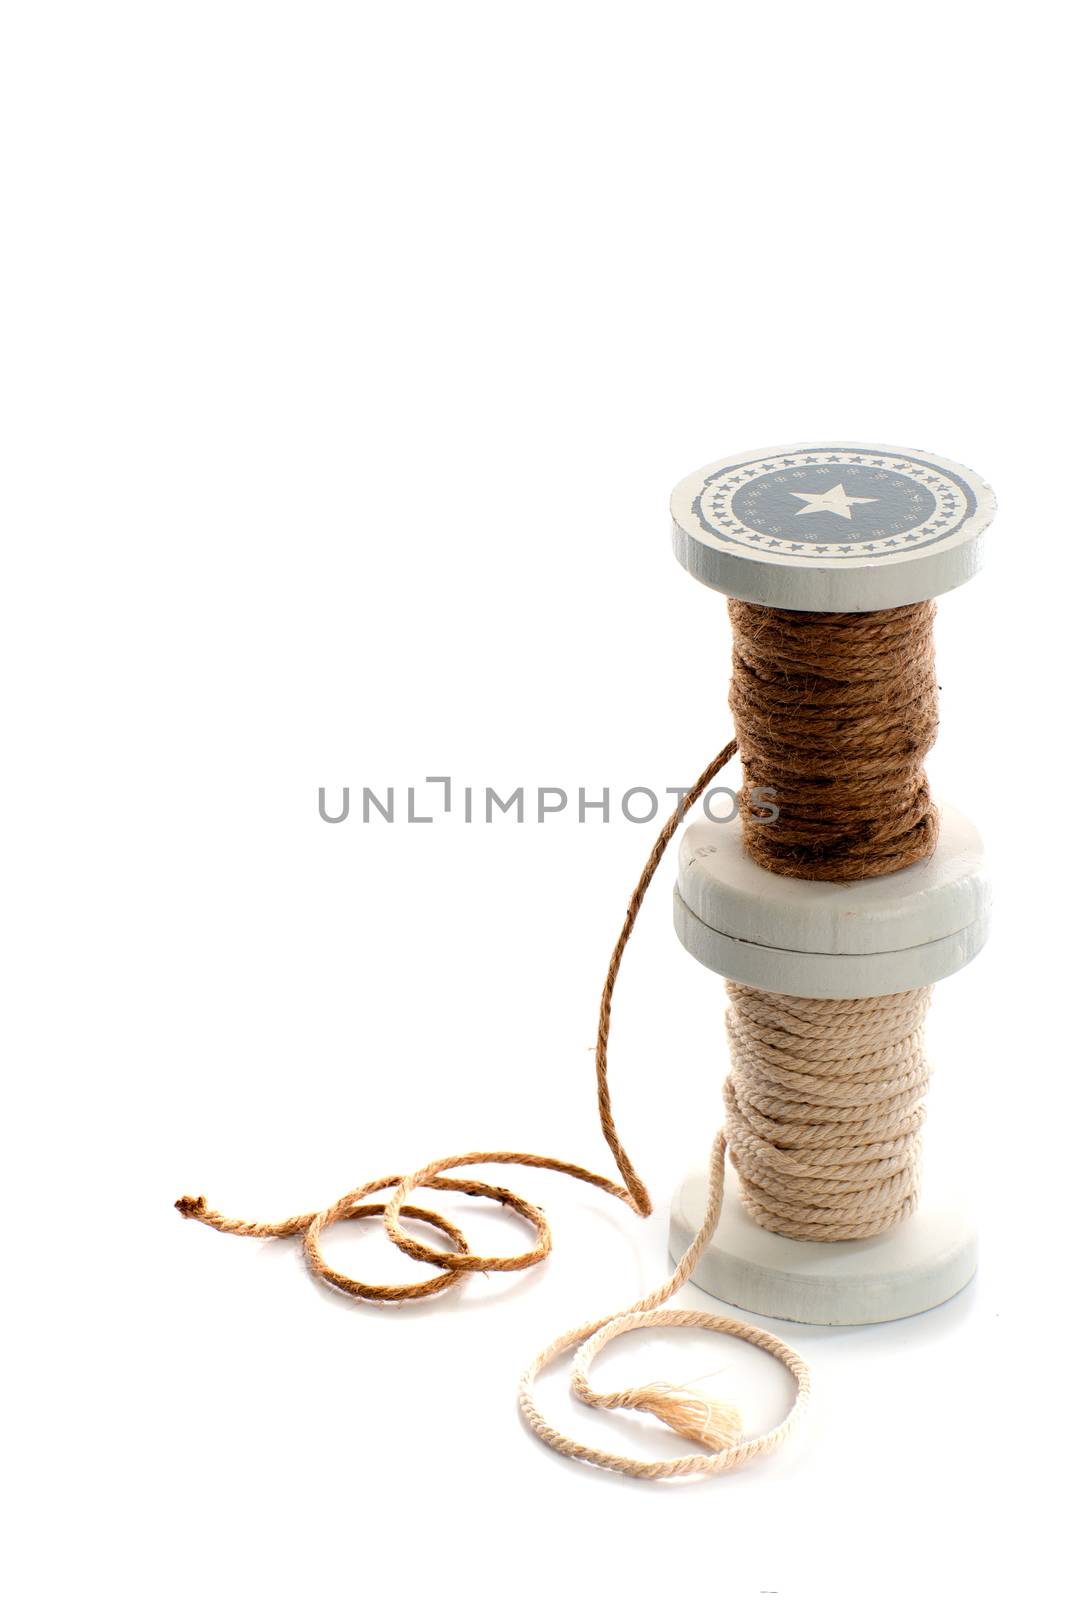 two spools of rope on a white background